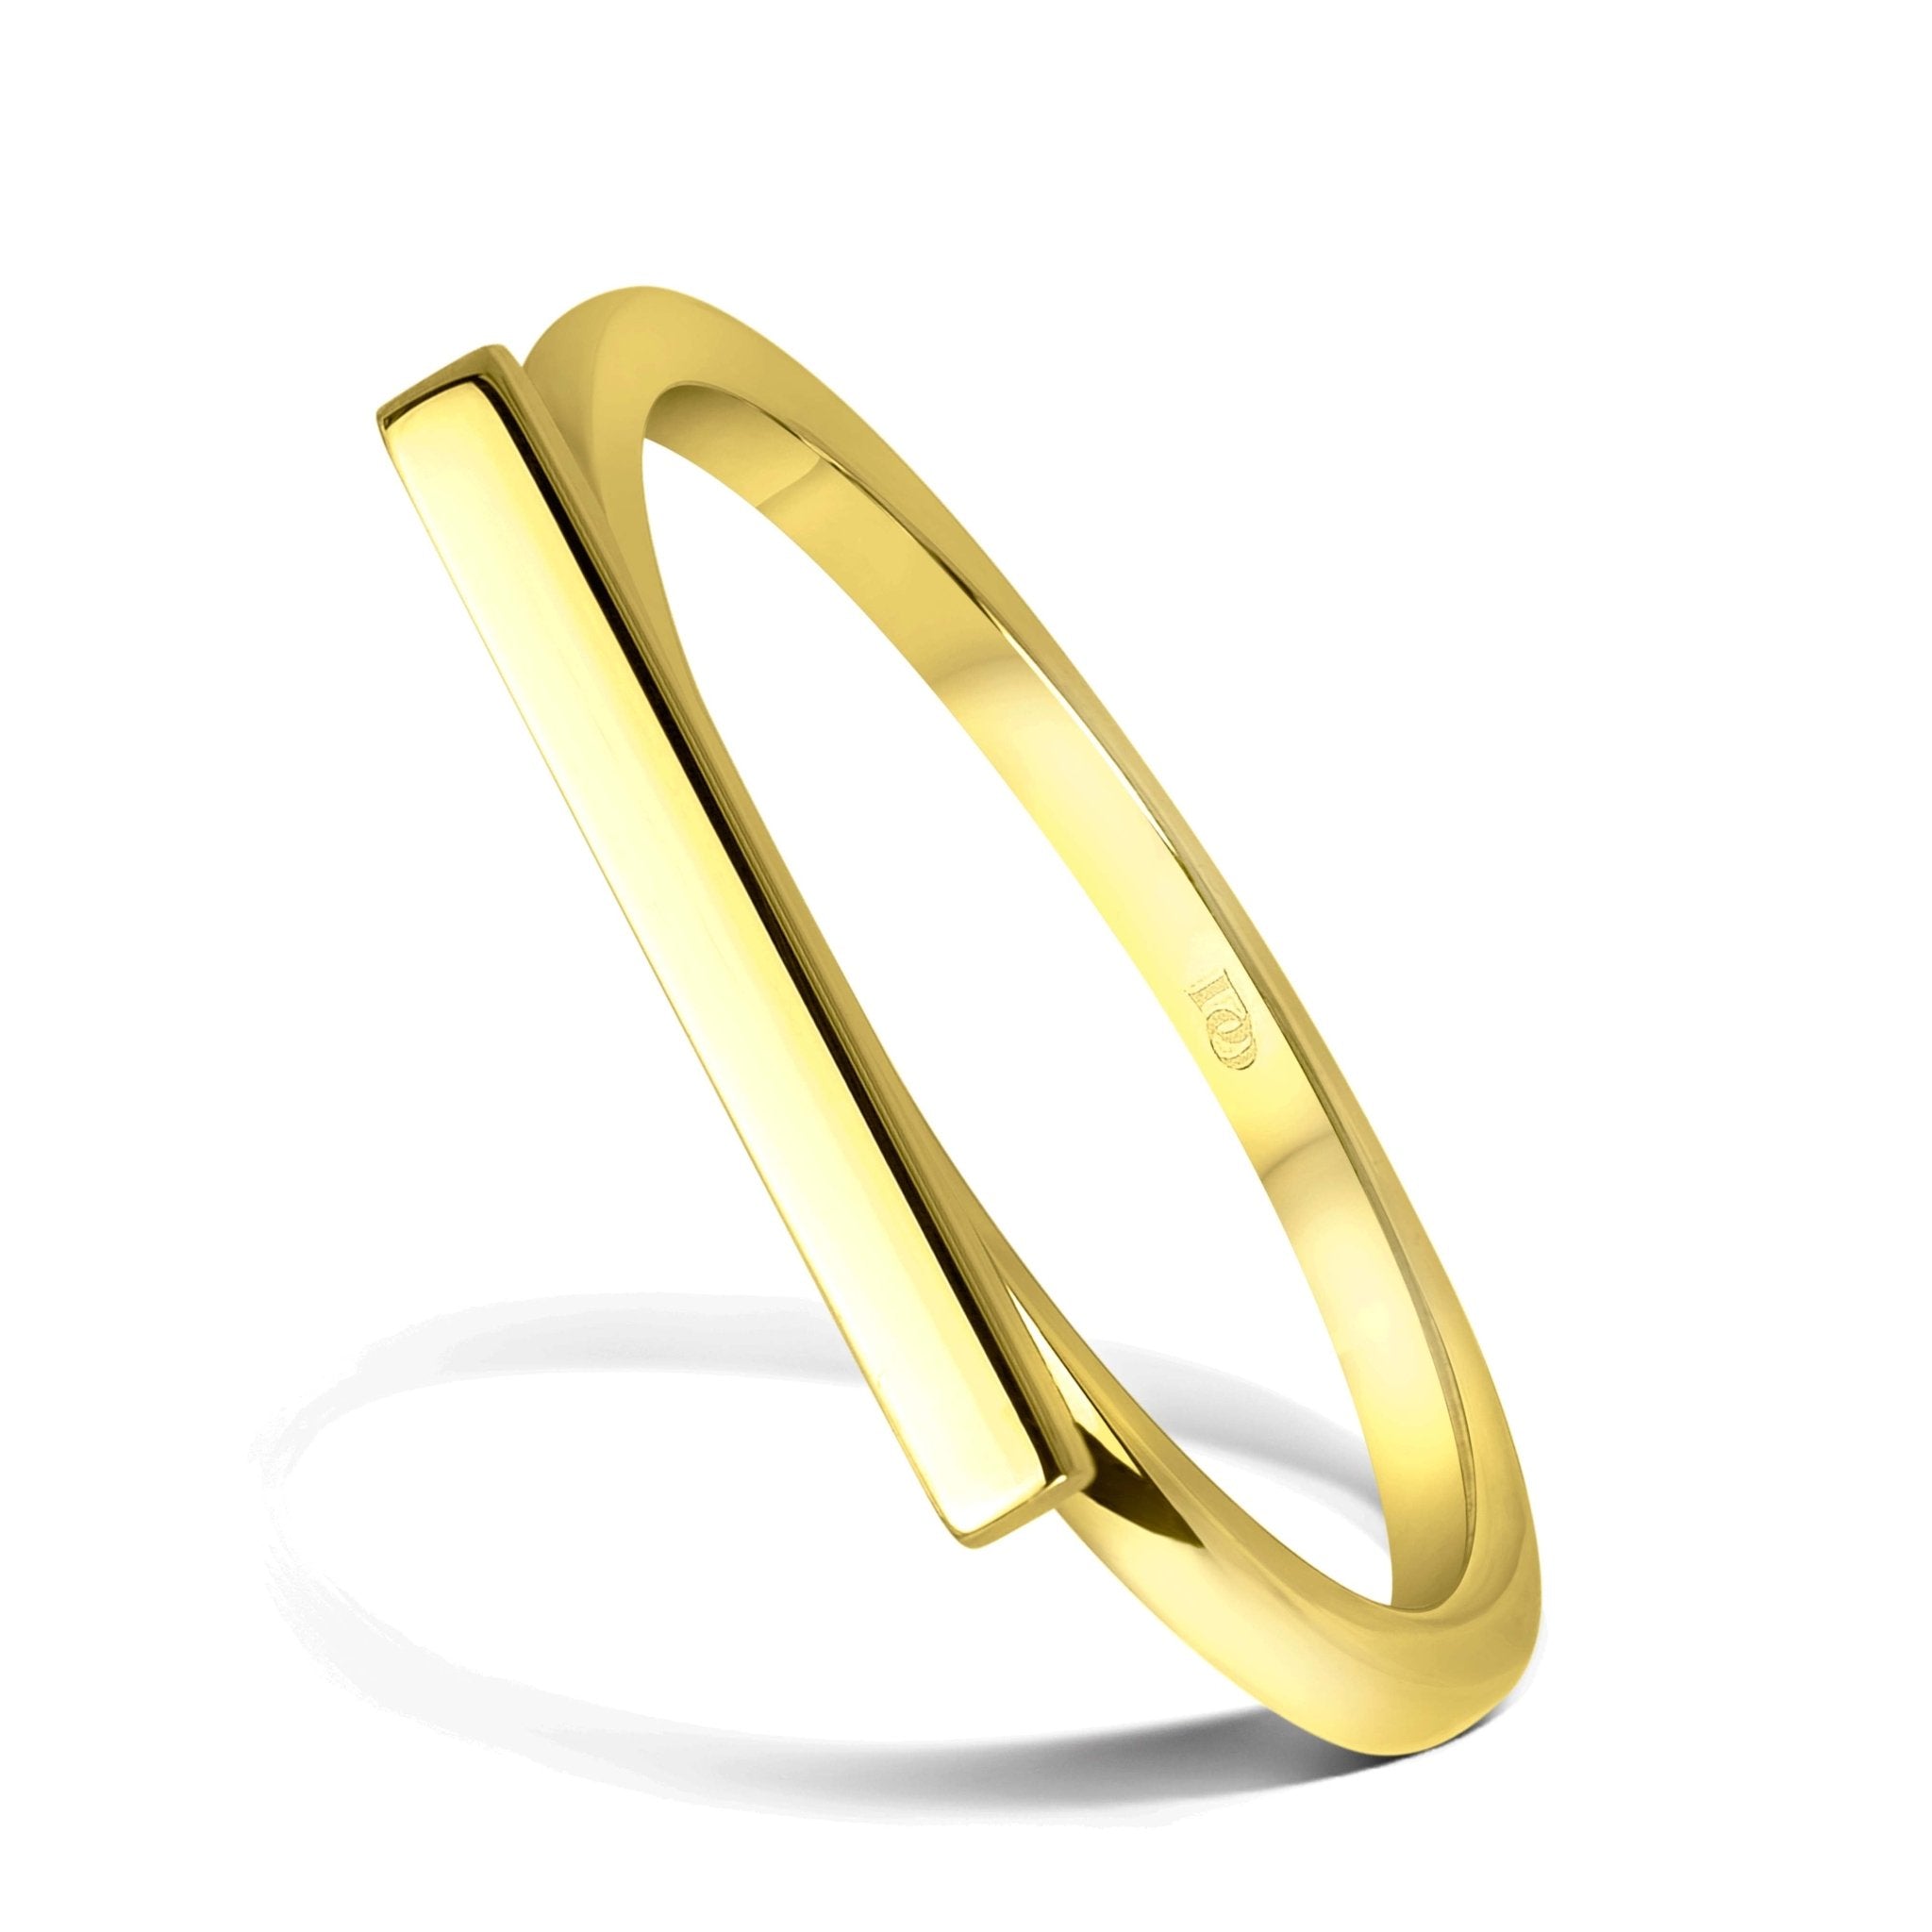 Gold rings | Latest gold ring designs, Gold ring designs, Gold rings fashion